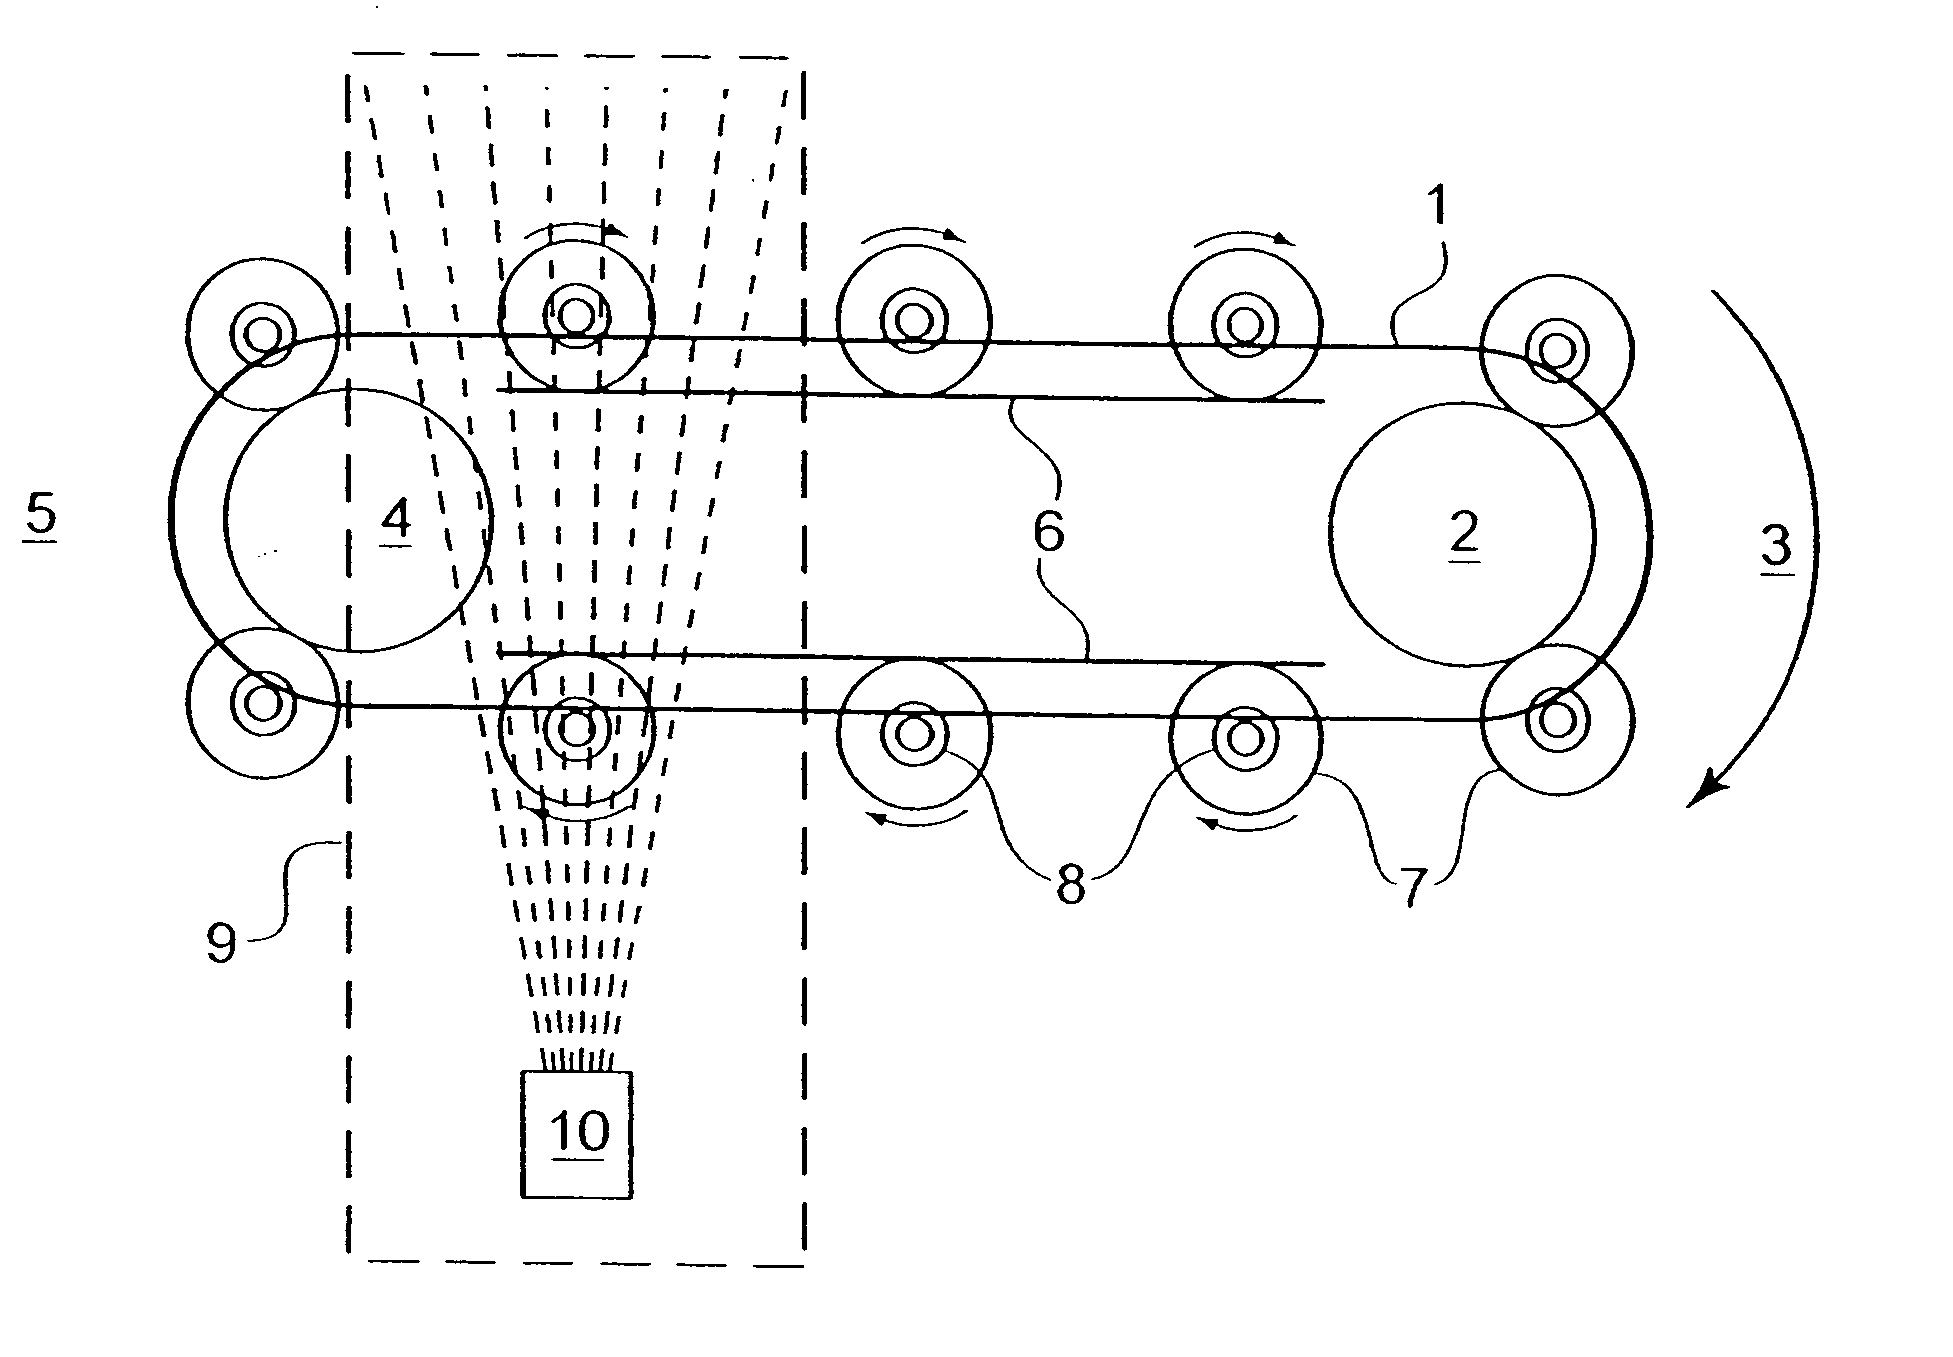 Method for roll coating multiple stents